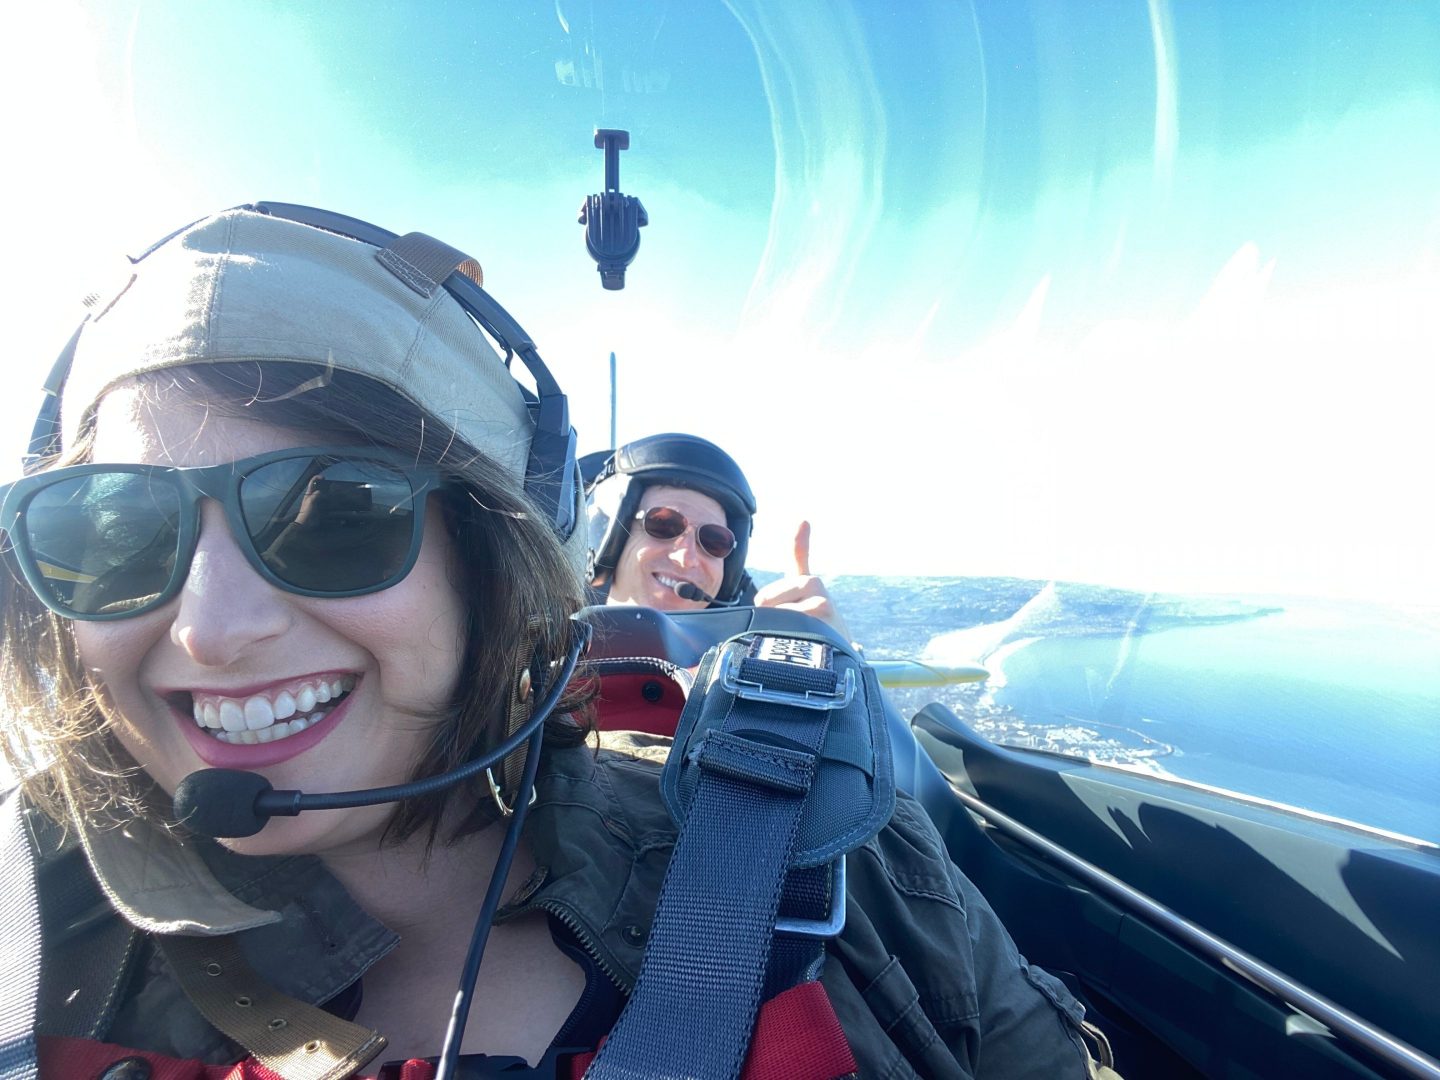 Left to right, Fortune reporter Allie Garfinkle and UP.Partners cofounder Ben Marcus, up in the air.